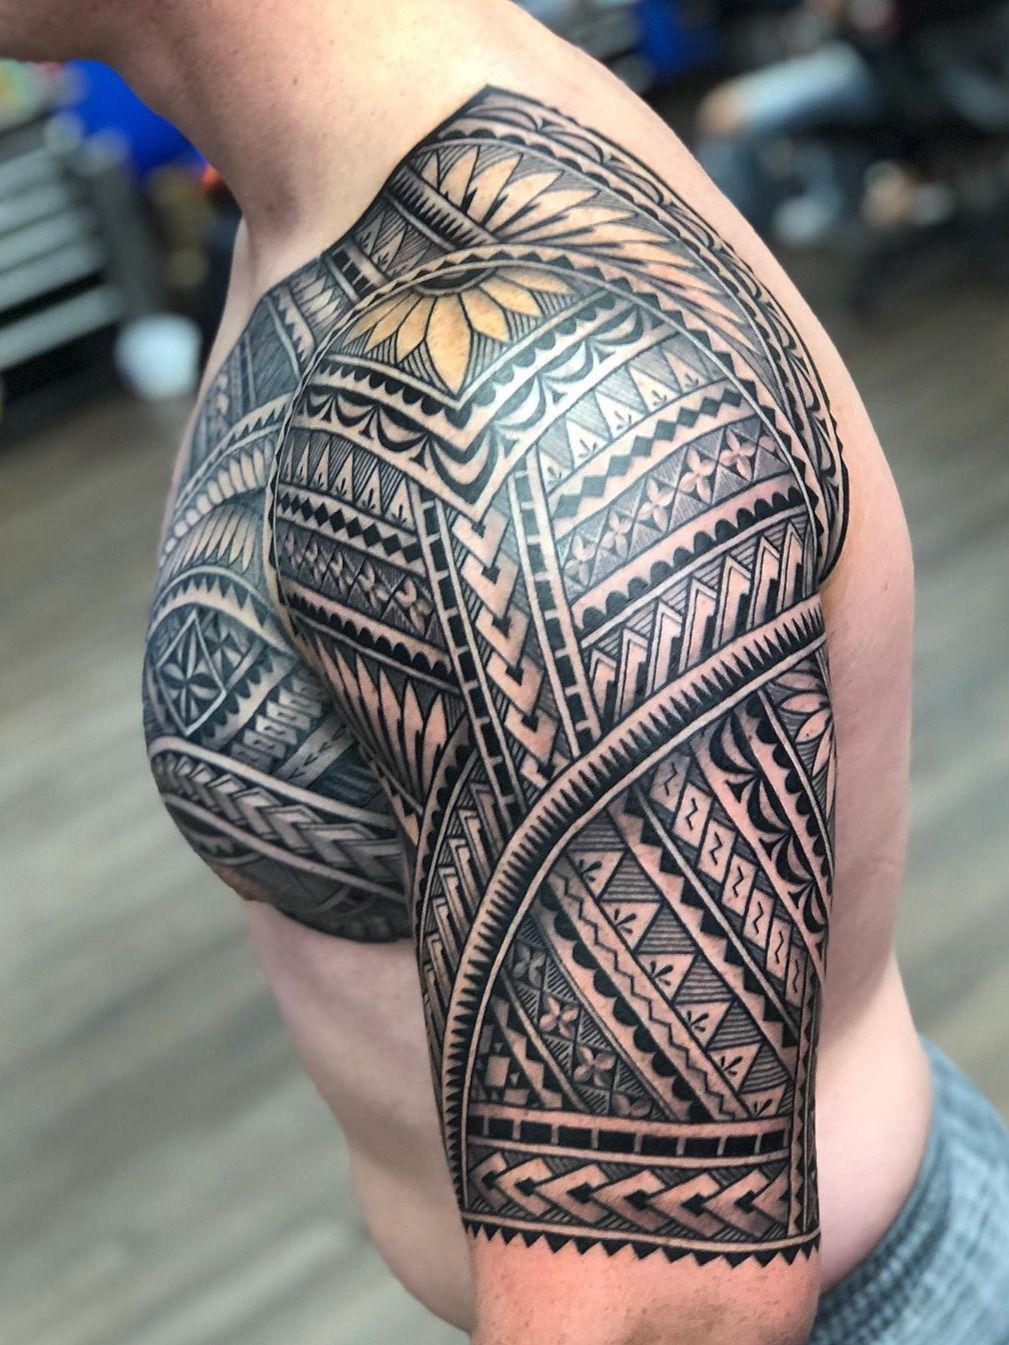 Buy Tribal Polynesian Tattoo Half Sleeve Shoulder to Elbow Online in India   Etsy